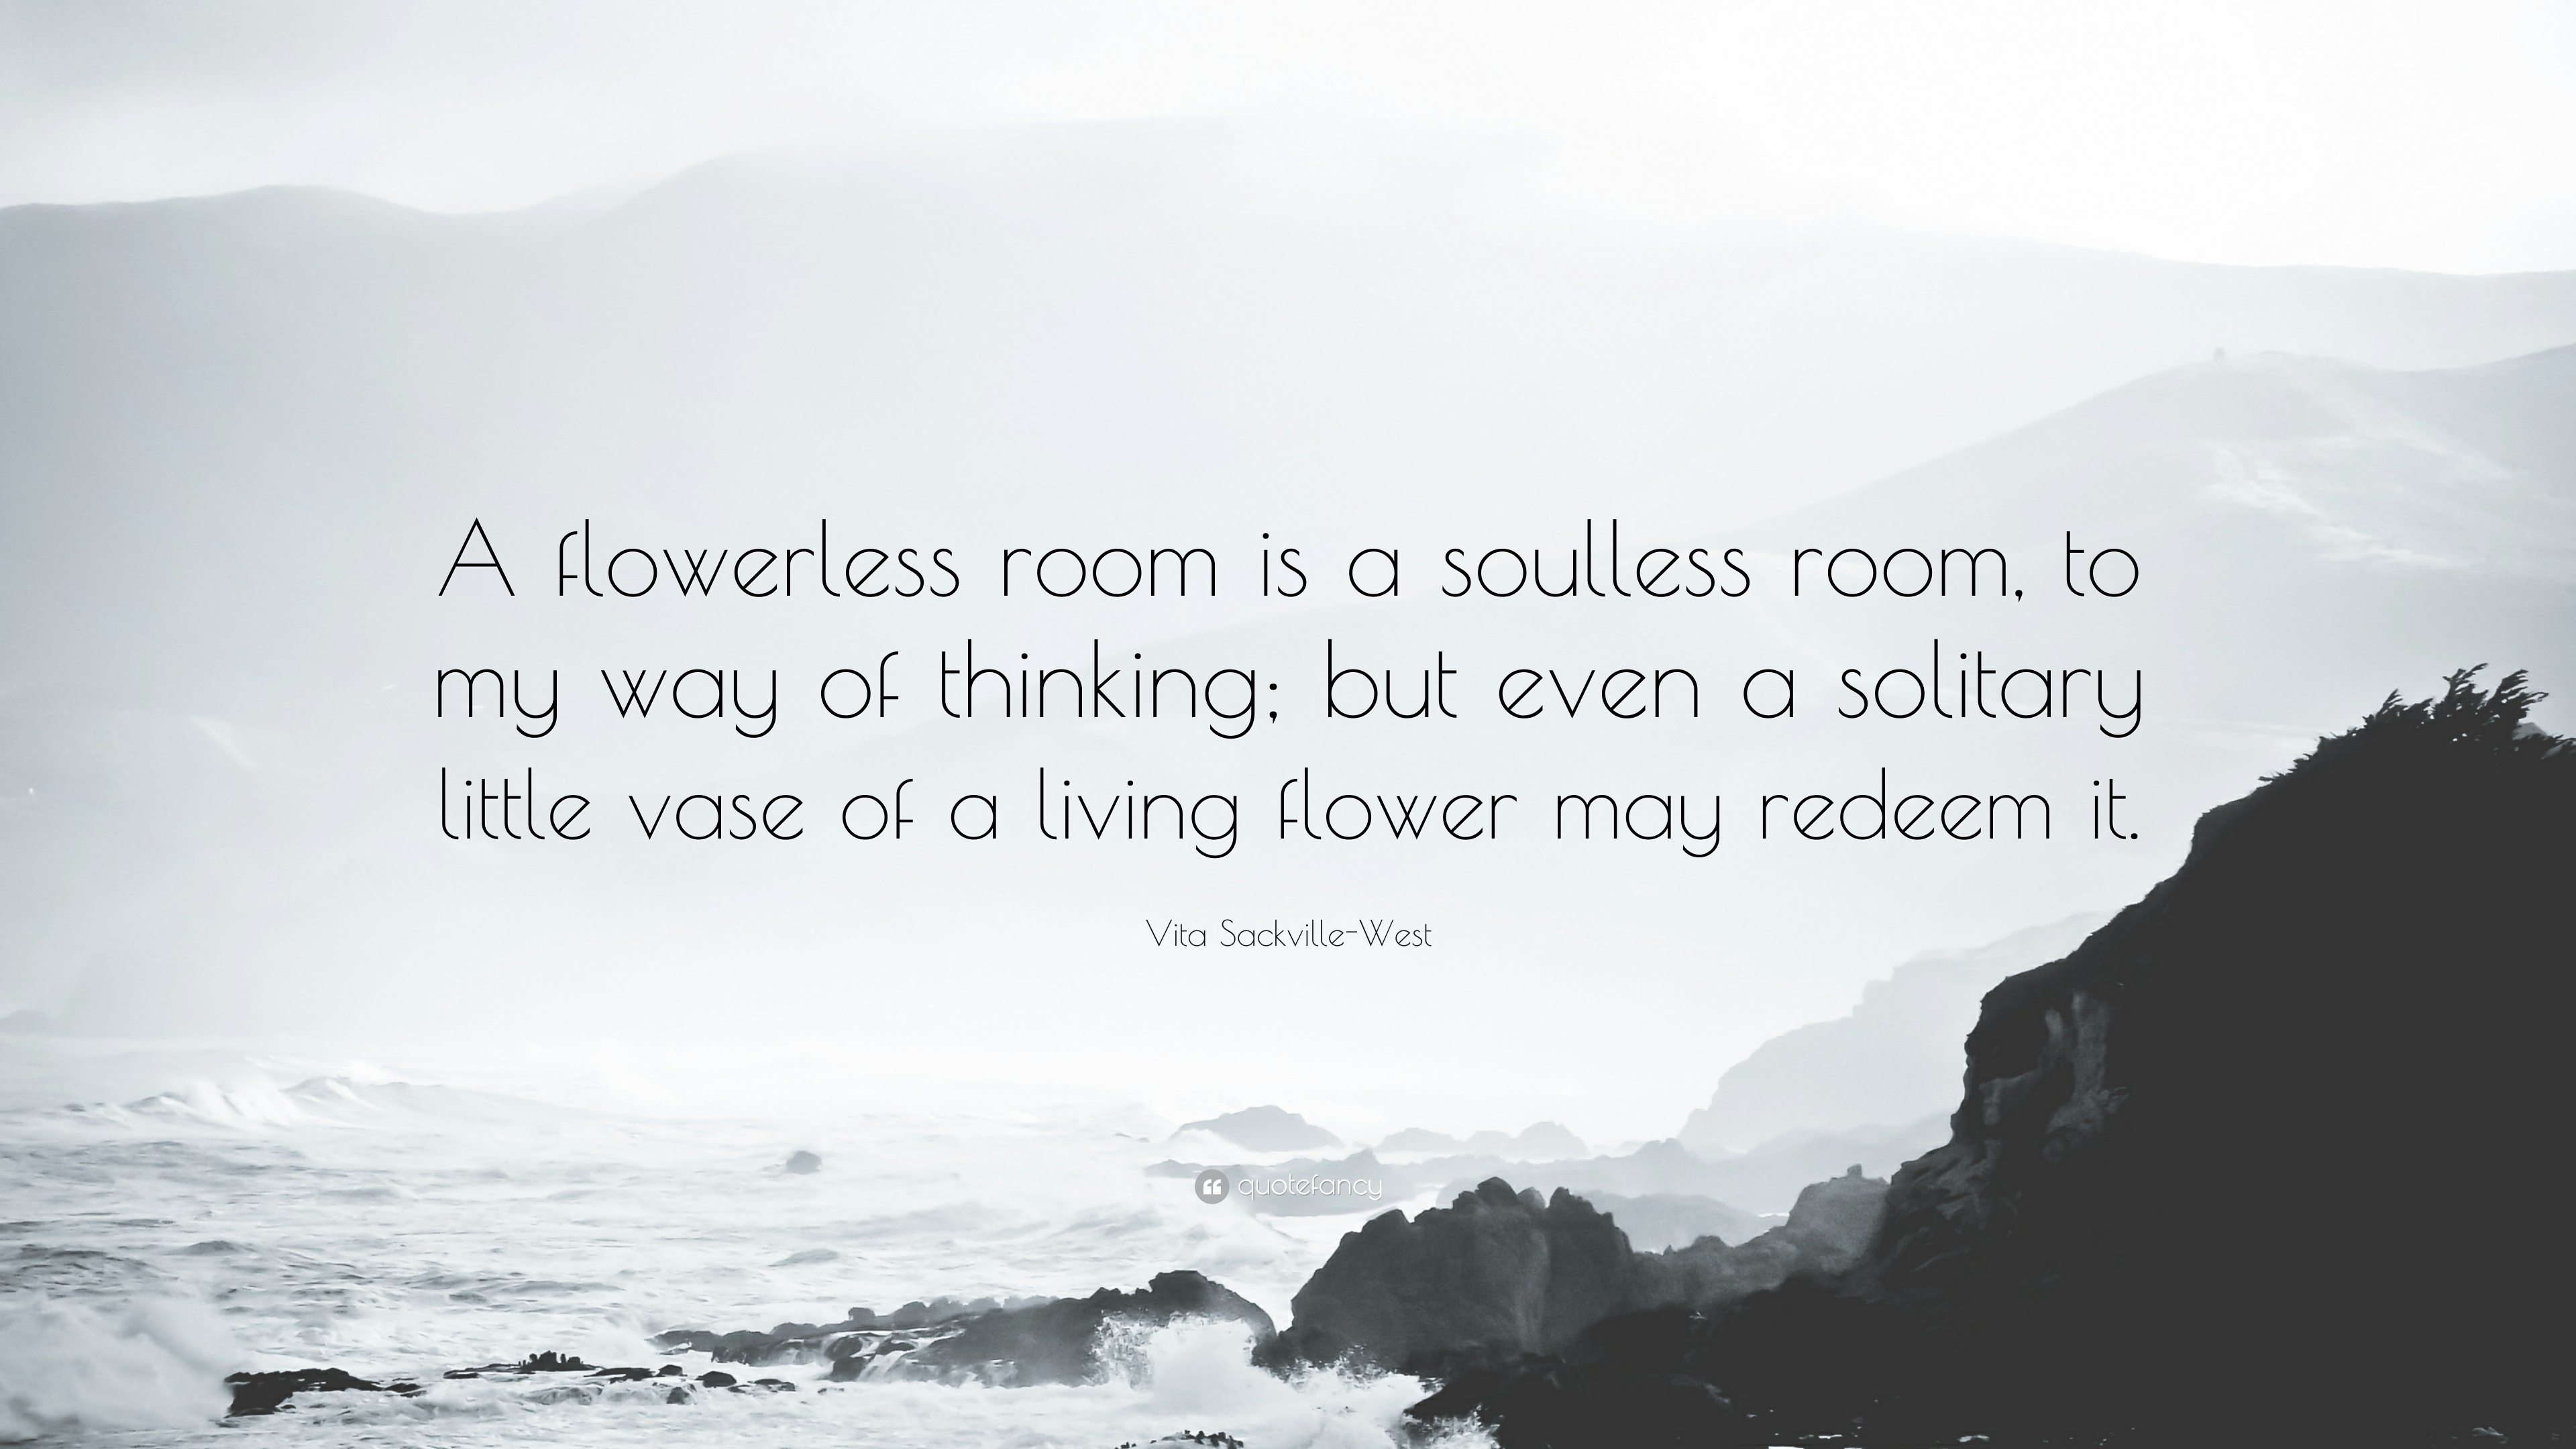 Vita Sackville West Quote: “A Flowerless Room Is A Soulless Room